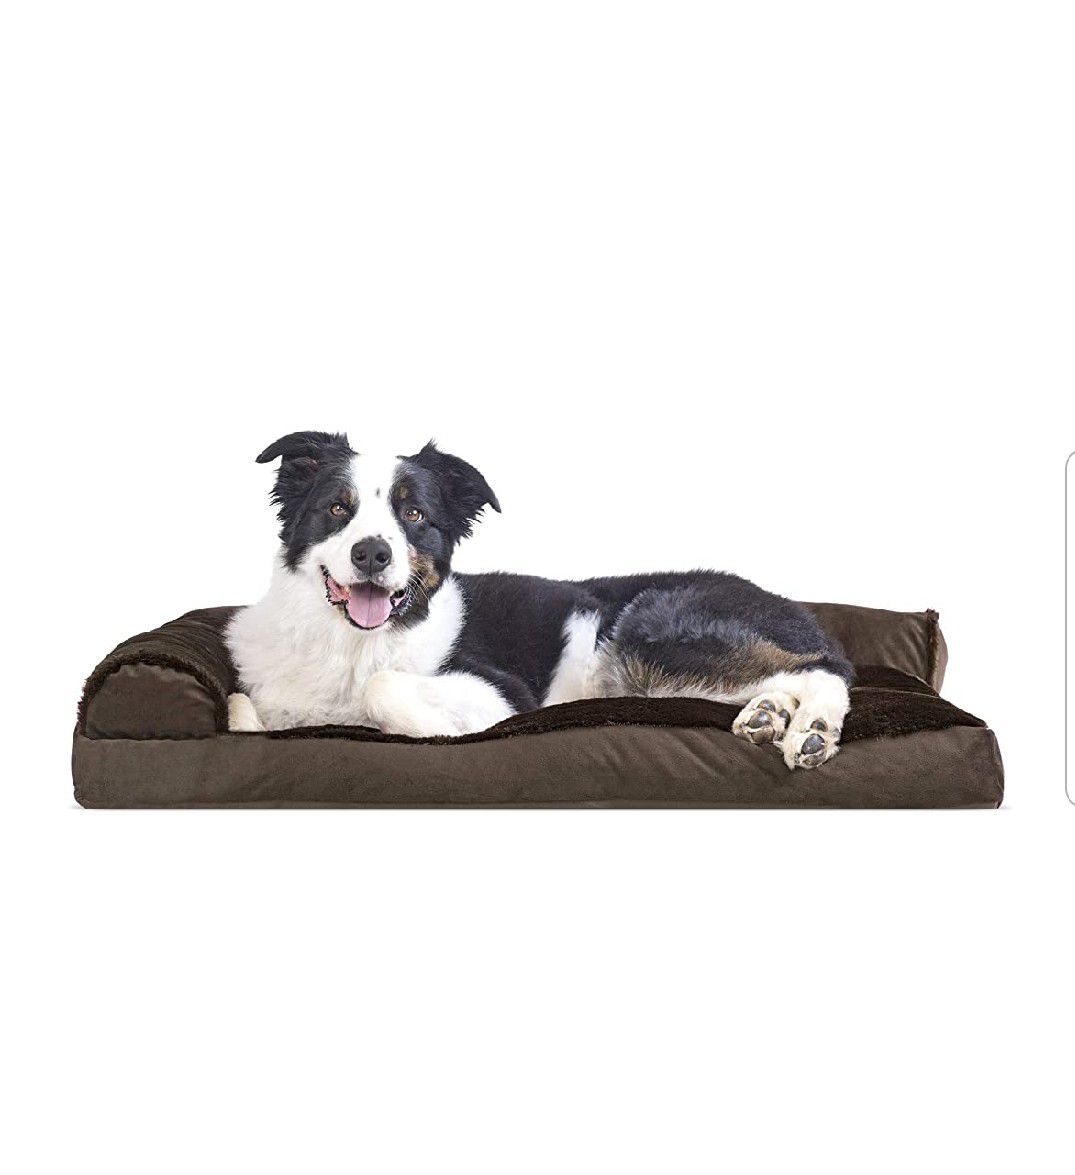 Furhaven Pet Dog Bed | Deluxe Pillow Cushion Chaise Lounge Sofa-Style Living Room Couch Pet Bed w/ Removable Cover for Dogs & Cats